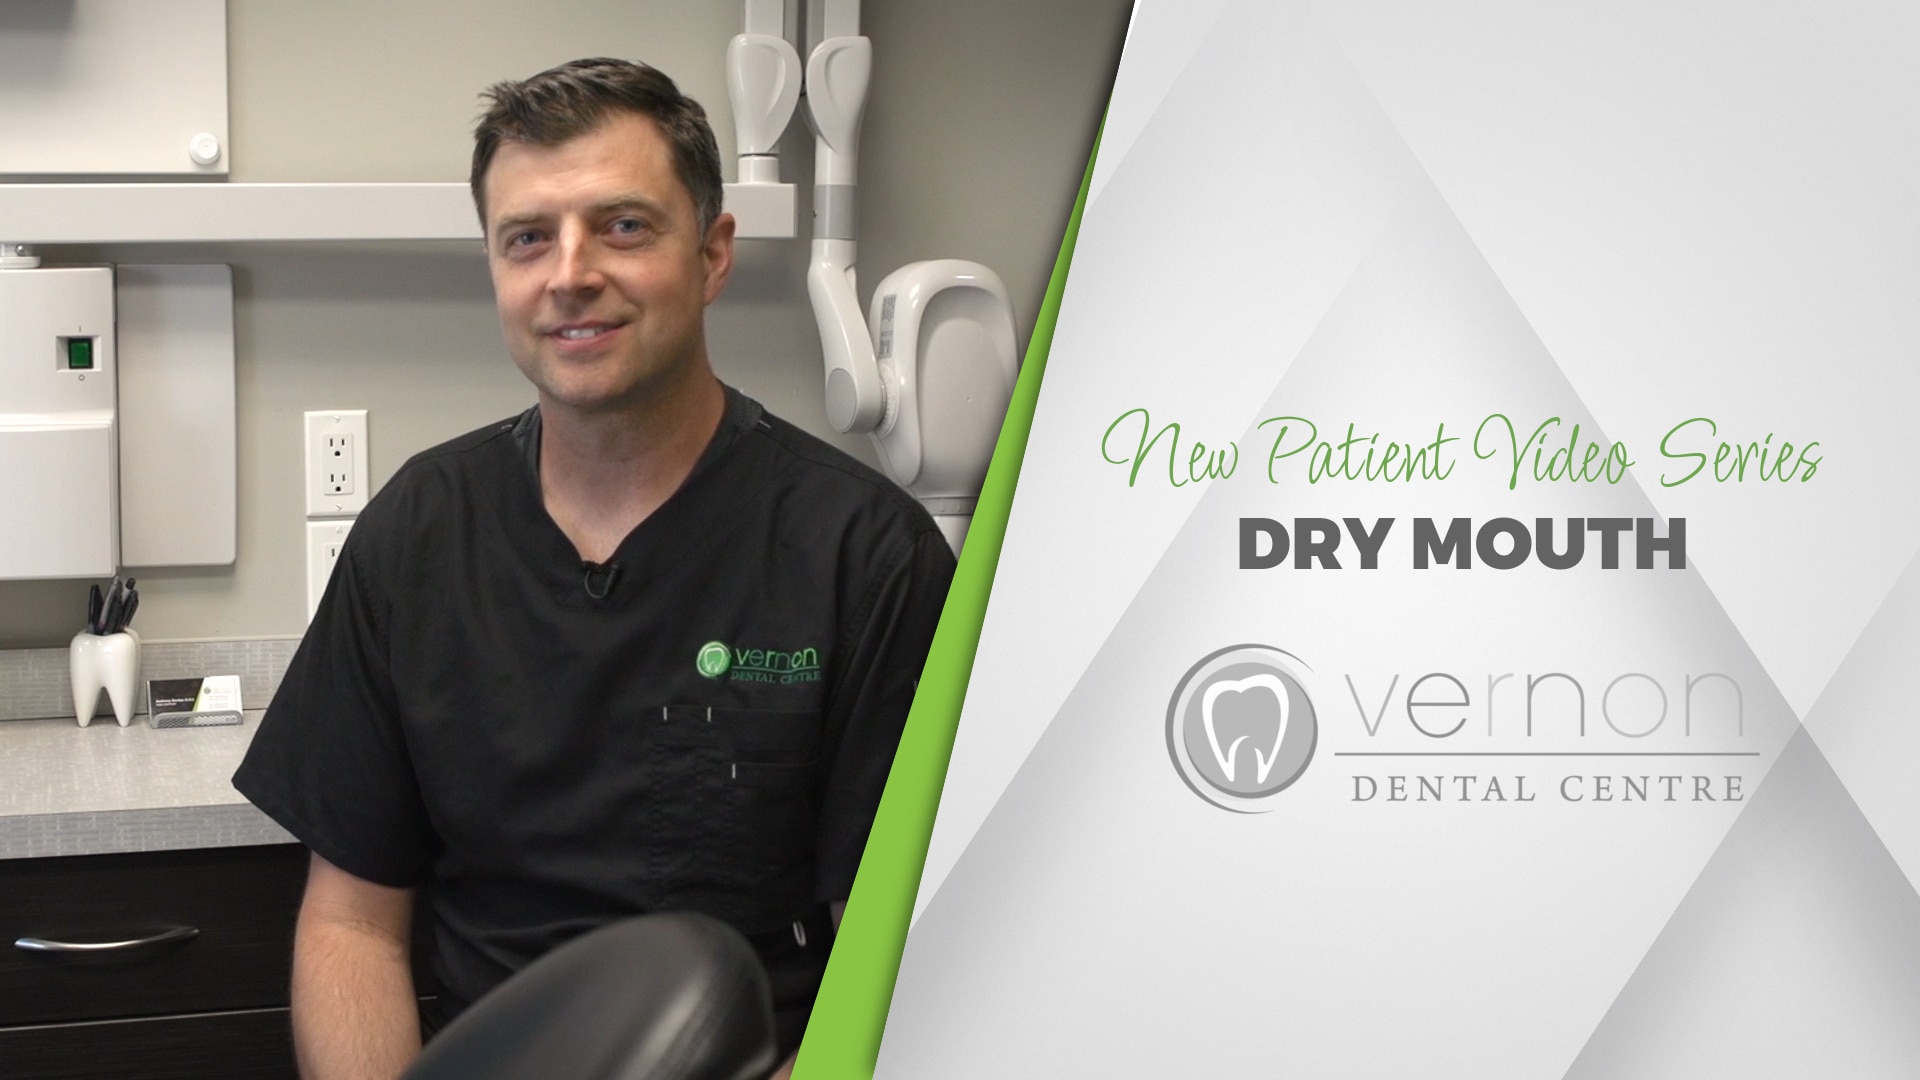 Dr. Anthony Berdan from Vernon Dental Centre discusses what you should do if you have dry mouth